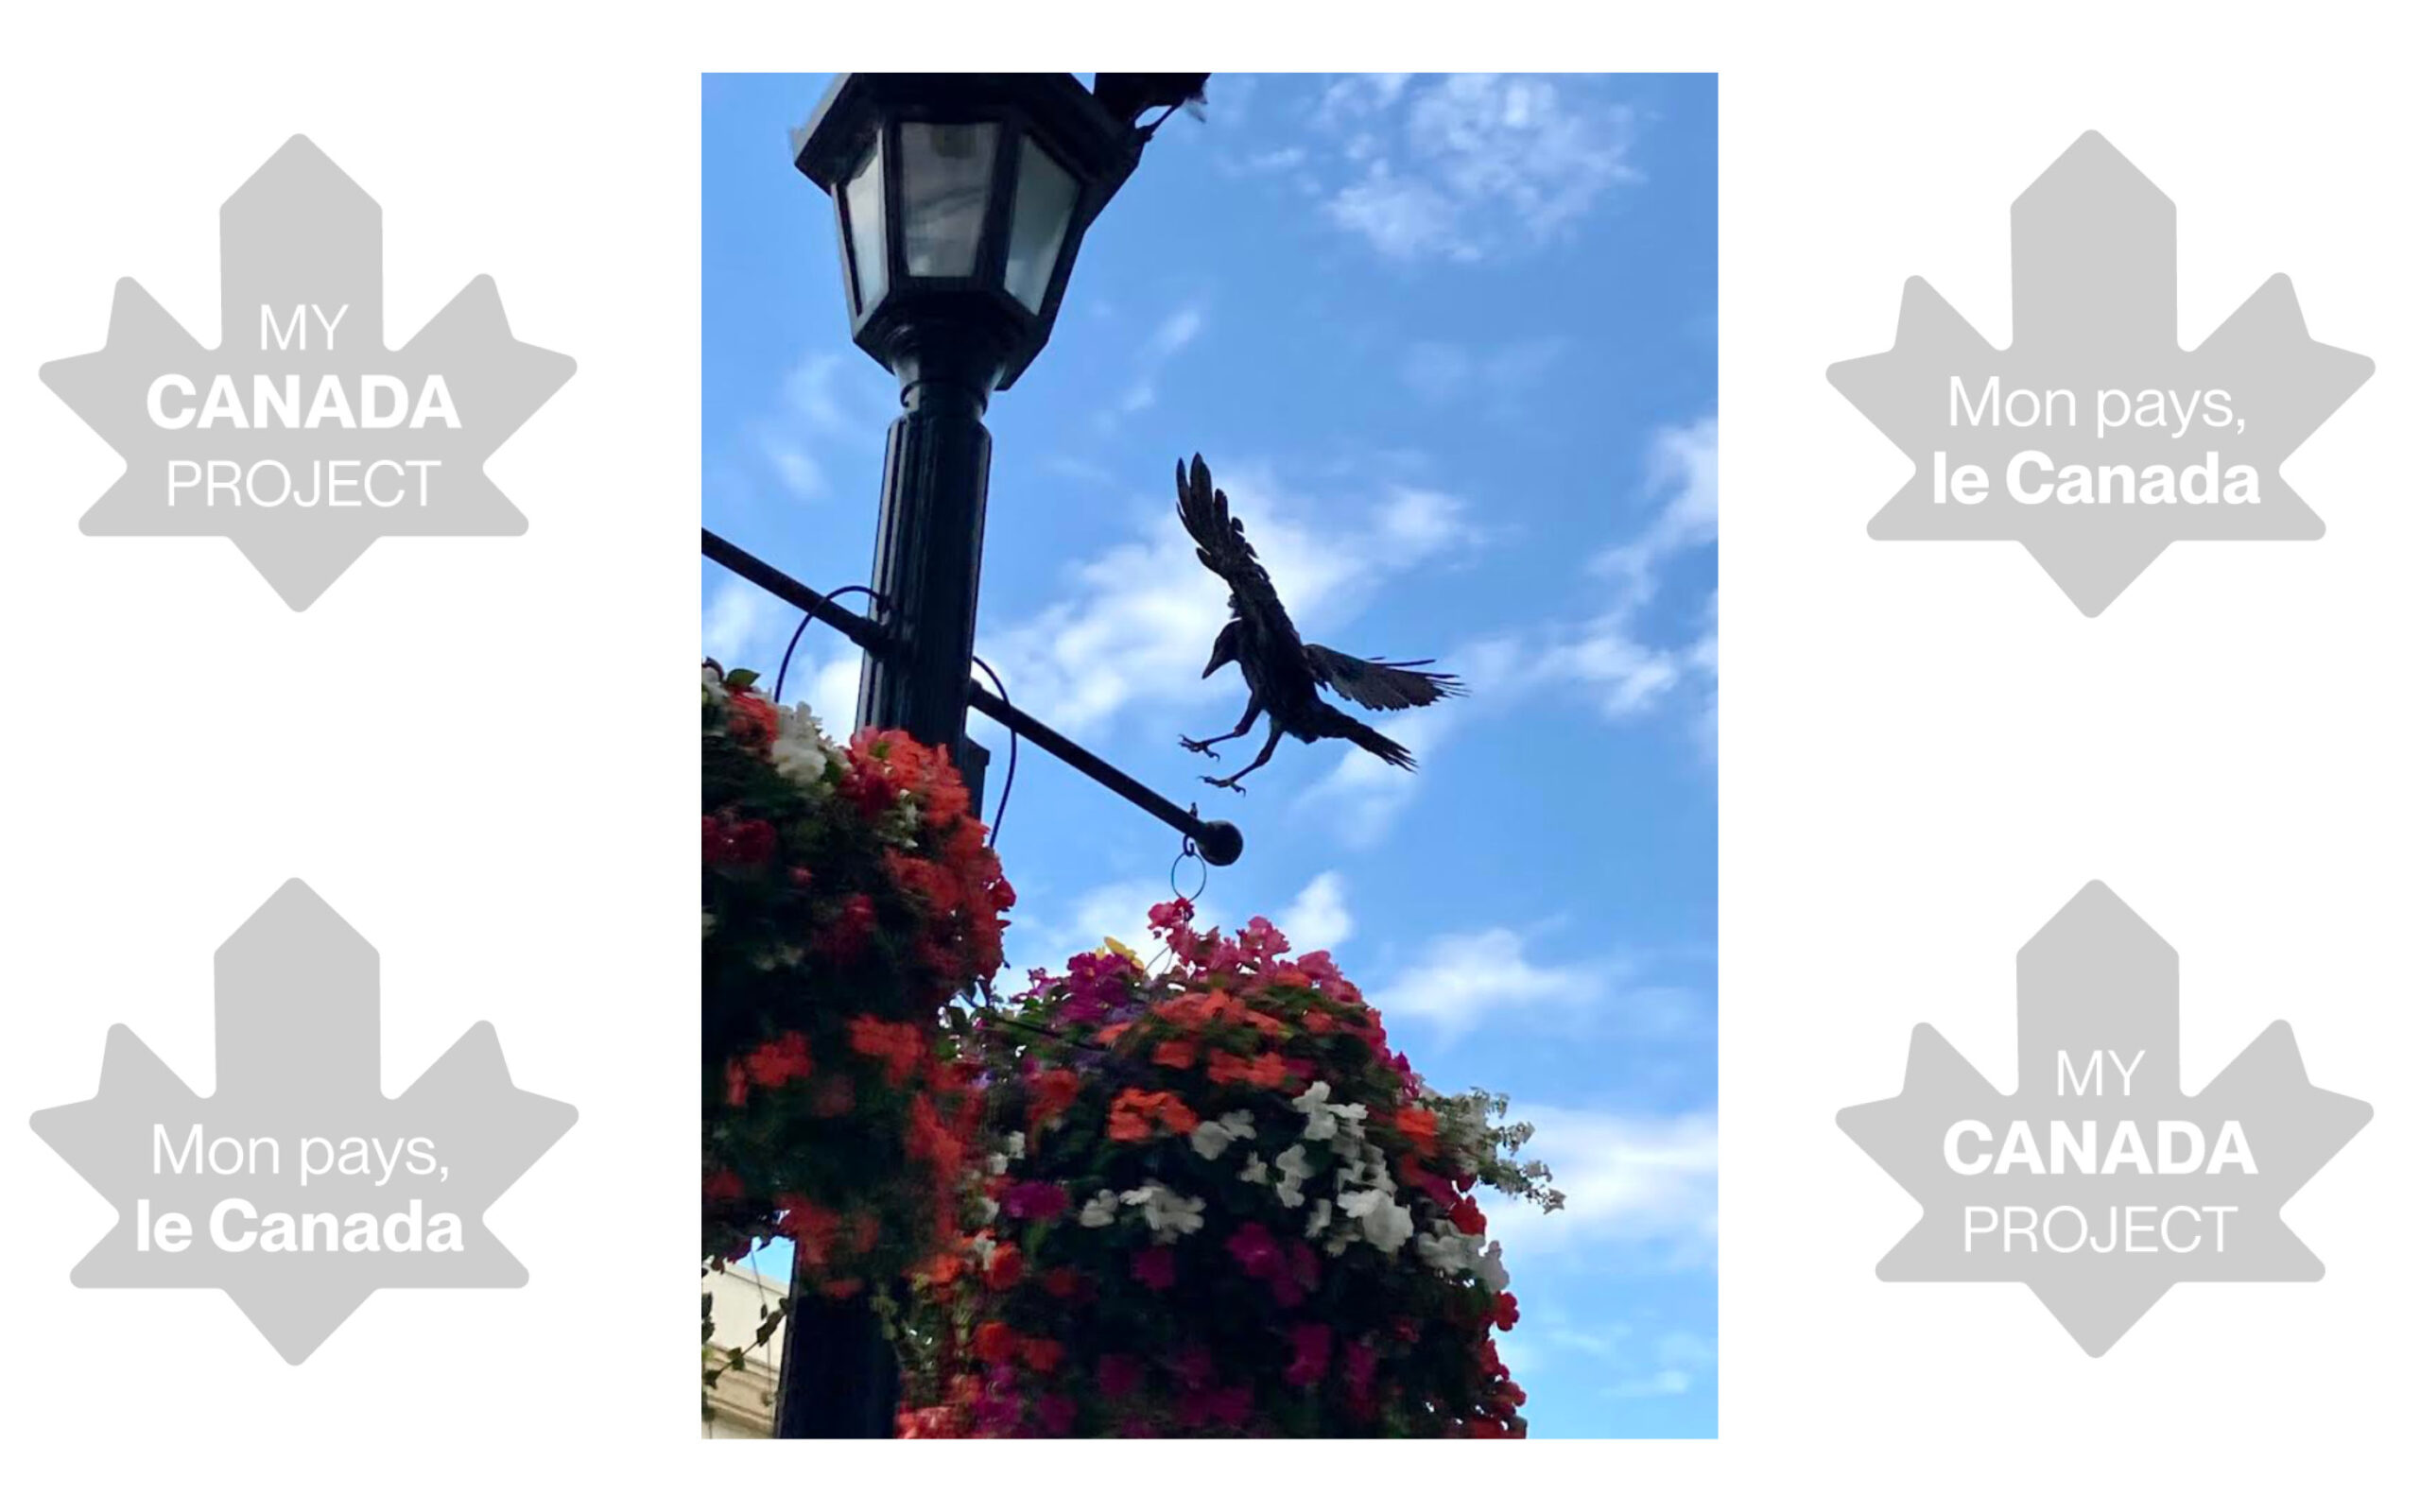 A photo of a crow in flight about to land on a lamppost.  The crow has its wings and feet outstretched towards a perch on the lamppost, it is inches away from landing. The lamppost stands on the left side of the image. Planters full of colourful flowers hang from the lamppost.